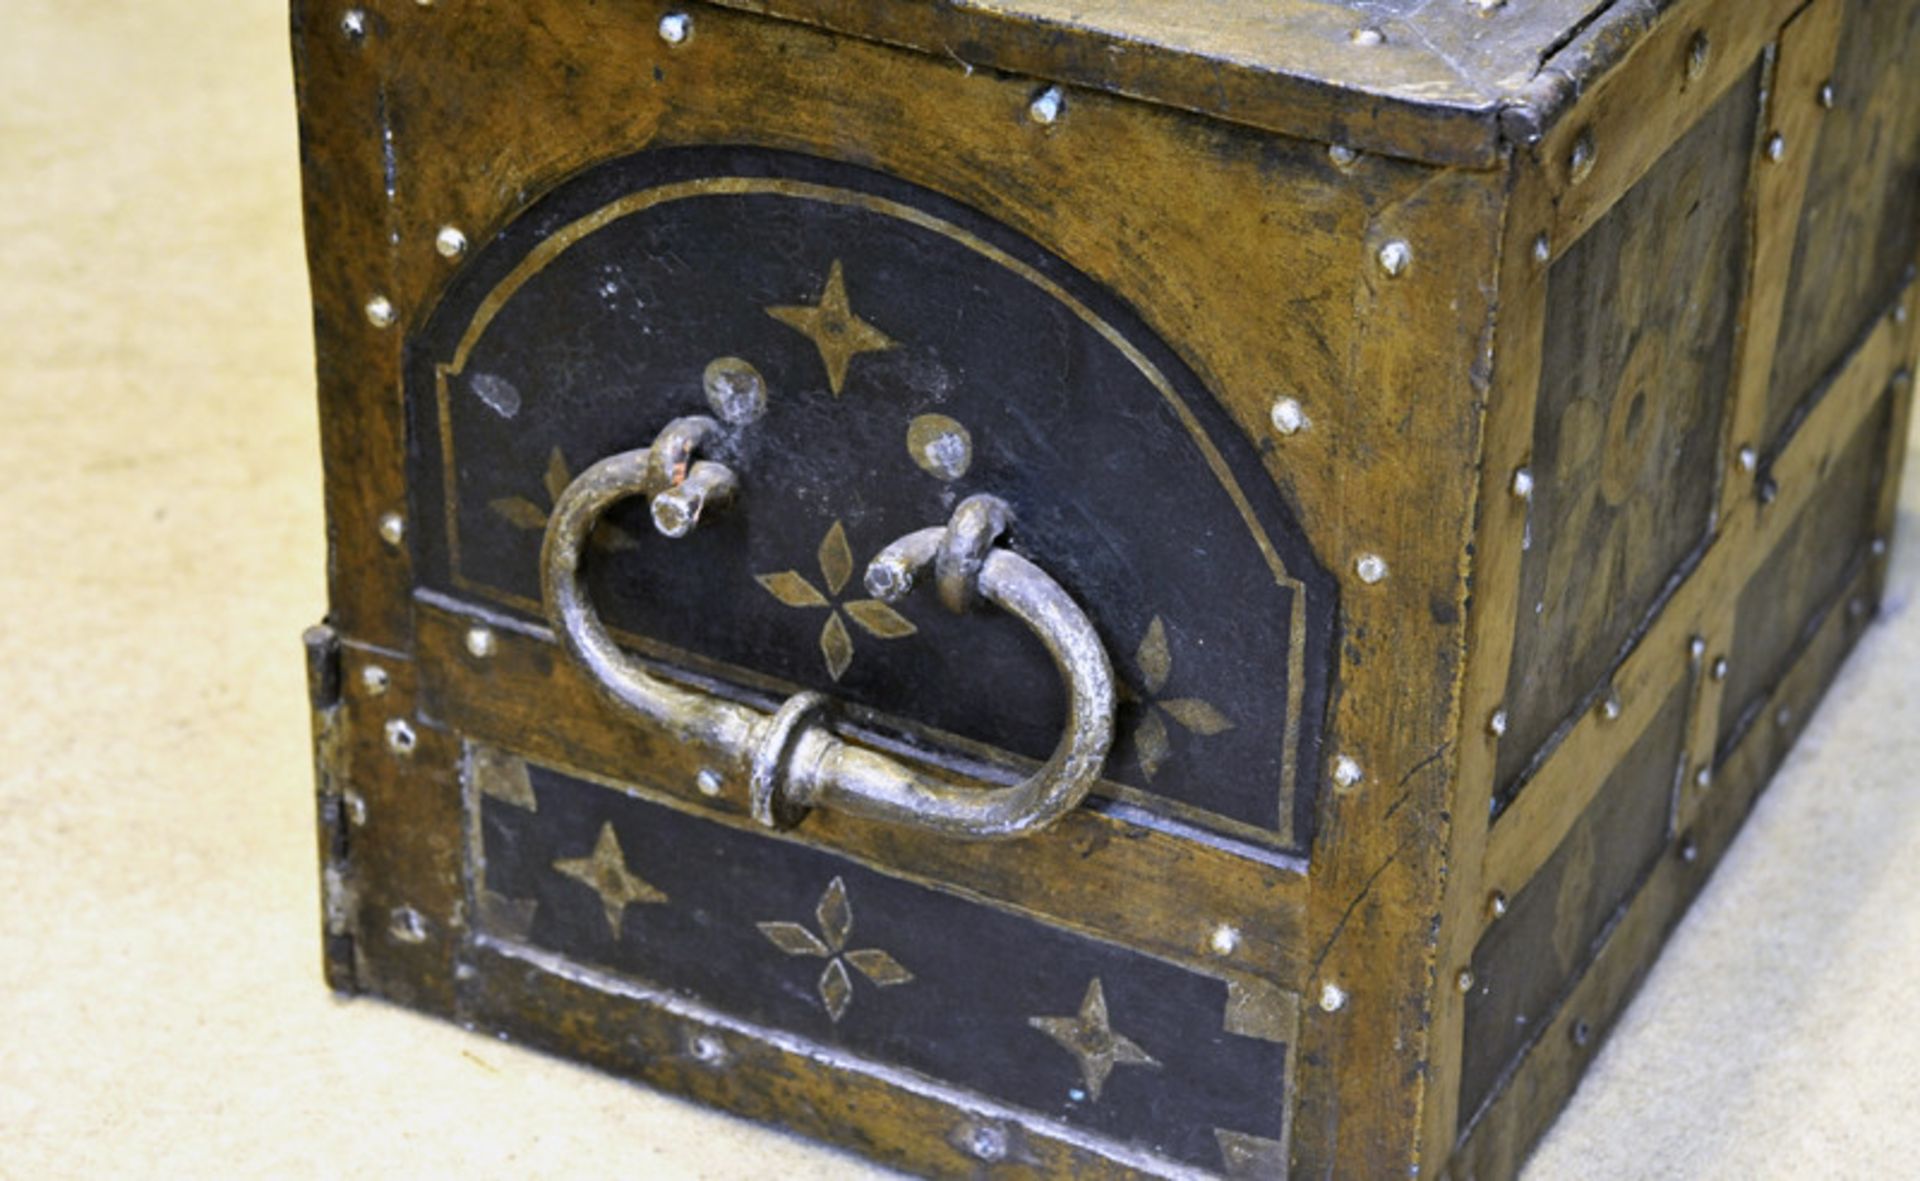 A travelling iron strong-box, dating: 18th Century, provenance: Europe, dating: 18th Century, - Image 10 of 11